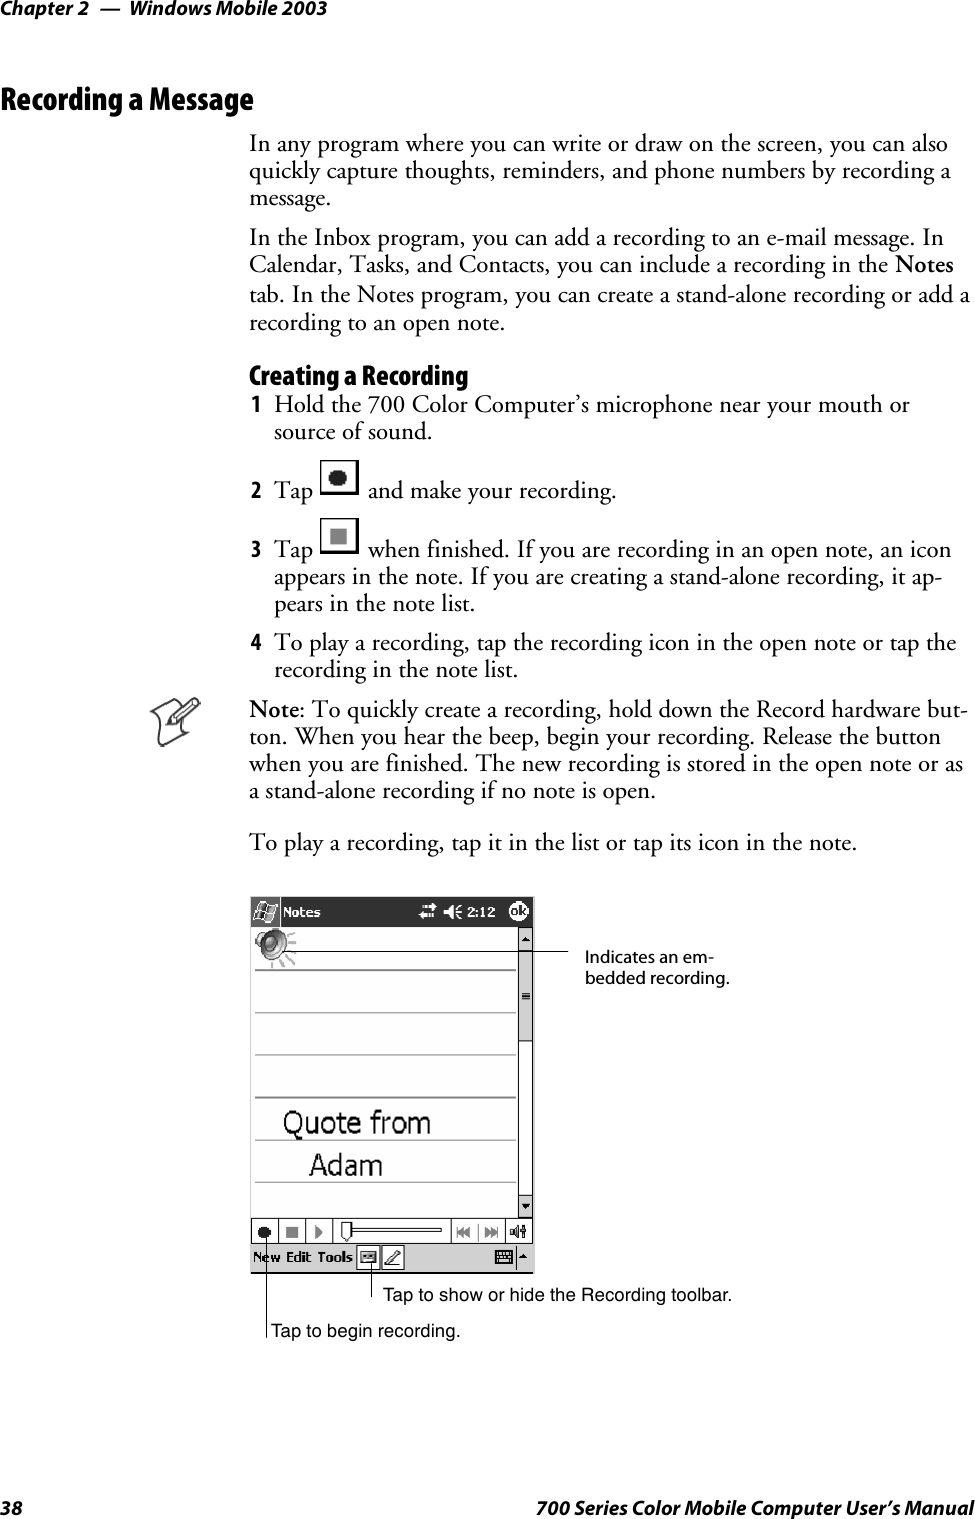 Windows Mobile 2003Chapter —238 700 Series Color Mobile Computer User’s ManualRecording a MessageIn any program where you can write or draw on the screen, you can alsoquickly capture thoughts, reminders, and phone numbers by recording amessage.In the Inbox program, you can add a recording to an e-mail message. InCalendar, Tasks, and Contacts, you can include a recording in the Notestab. In the Notes program, you can create a stand-alone recording or add arecording to an open note.Creating a Recording1Hold the 700 Color Computer’s microphone near your mouth orsource of sound.2Tap and make your recording.3Tap when finished. If you are recording in an open note, an iconappears in the note. If you are creating a stand-alone recording, it ap-pears in the note list.4To play a recording, tap the recording icon in the open note or tap therecording in the note list.Note: To quickly create a recording, hold down the Record hardware but-ton. When you hear the beep, begin your recording. Release the buttonwhen you are finished. The new recording is stored in the open note or asa stand-alone recording if no note is open.To play a recording, tap it in the list or tap its icon in the note.Indicates an em-bedded recording.Tap to begin recording.Tap to show or hide the Recording toolbar.